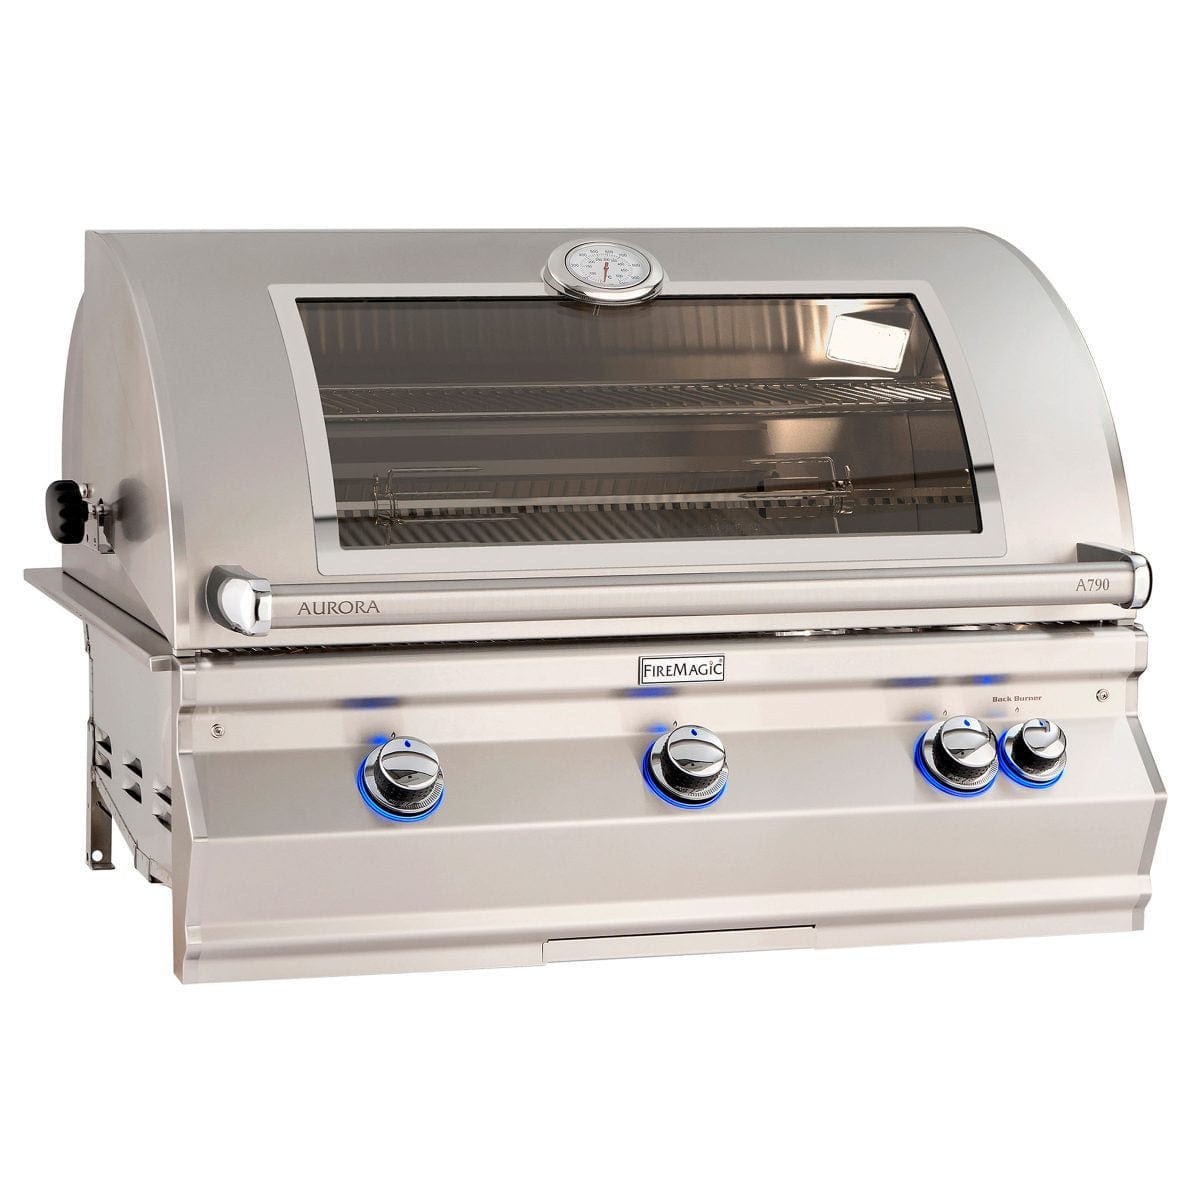 Fire Magic Aurora A790i Built-In Grill with Window - Kitchen King Direct